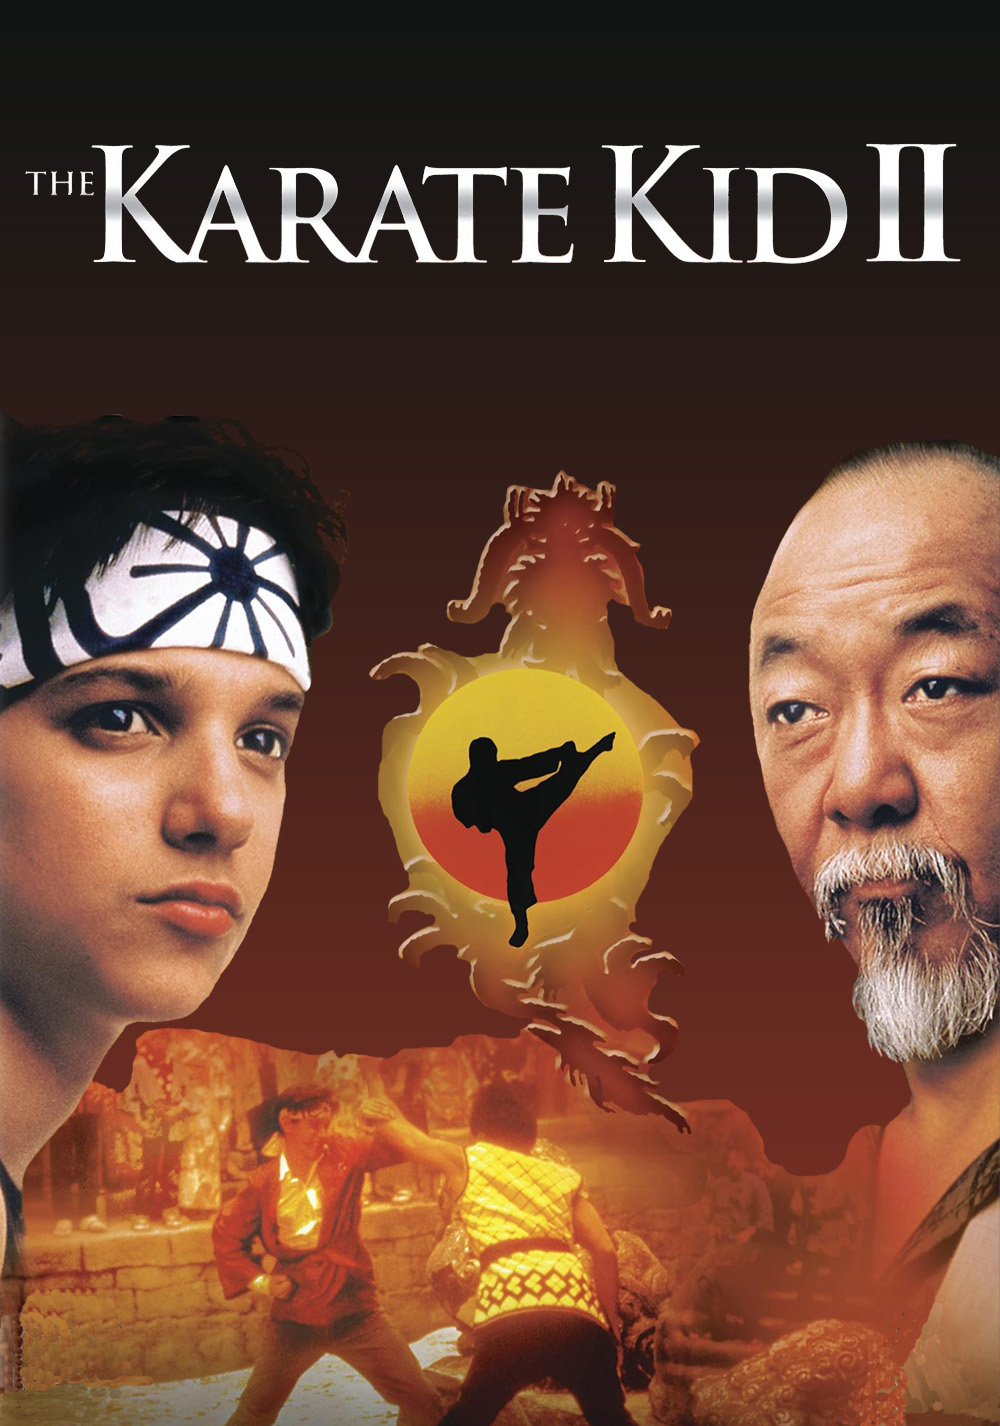 The Karate Kid Part II Picture - Image Abyss